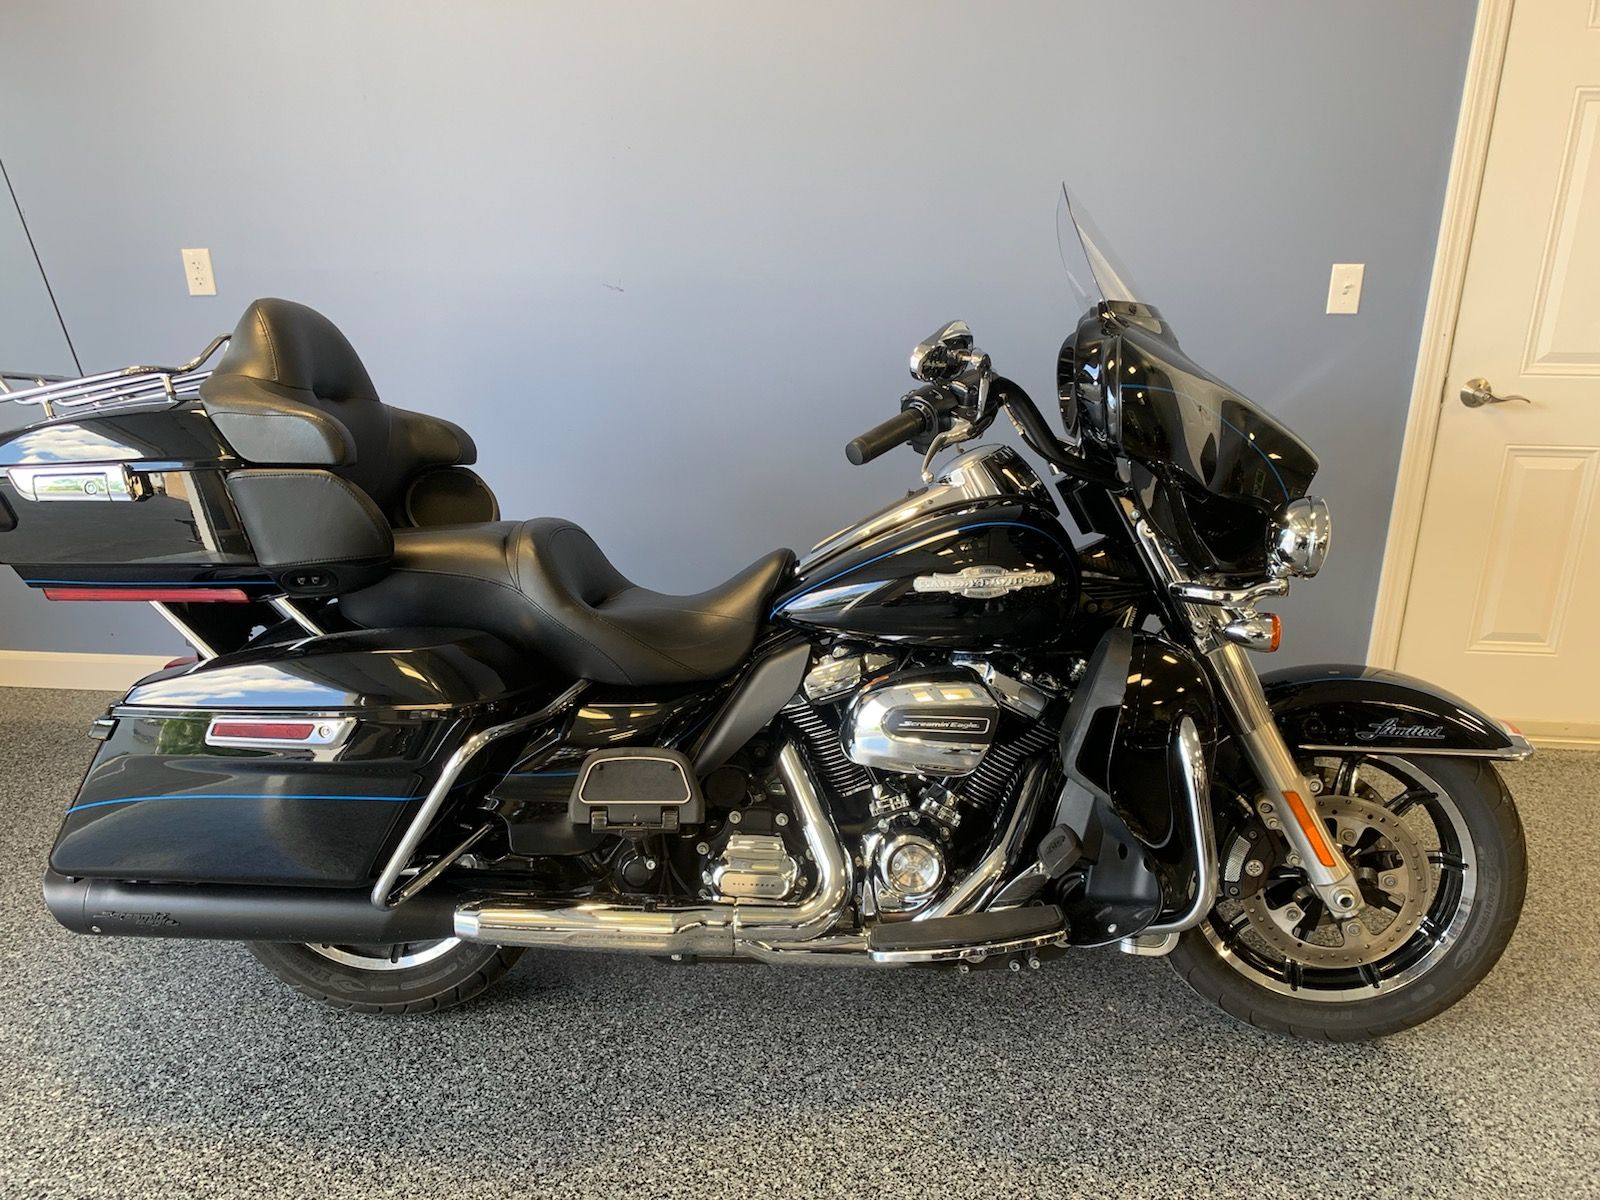 2018 Harley-Davidson Electra Glide® Ultra Classic® in Meredith, New Hampshire - Photo 1